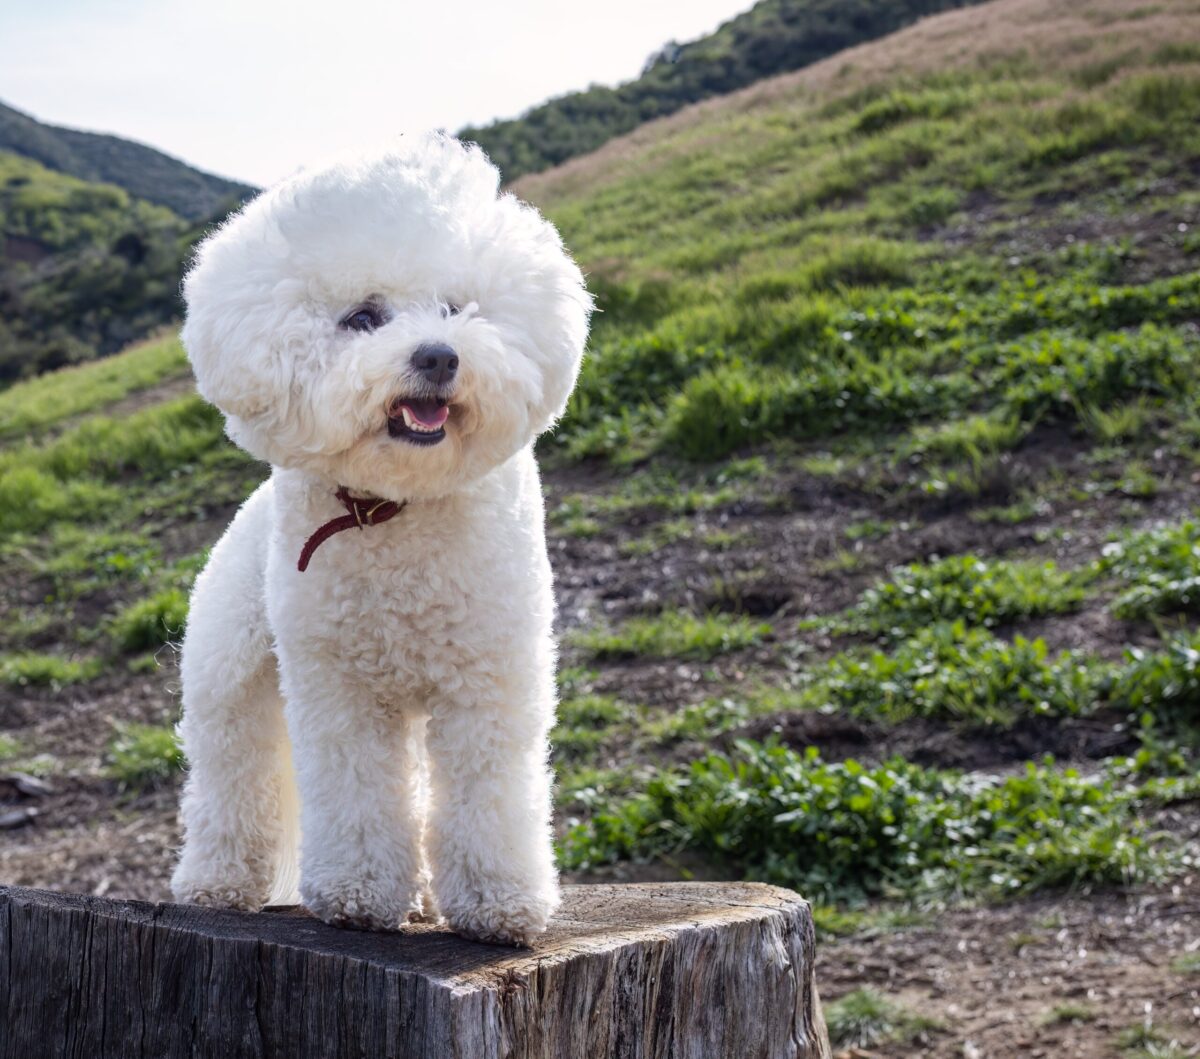 7 Best Dog Weight Loss Supplements for Bichon Frises